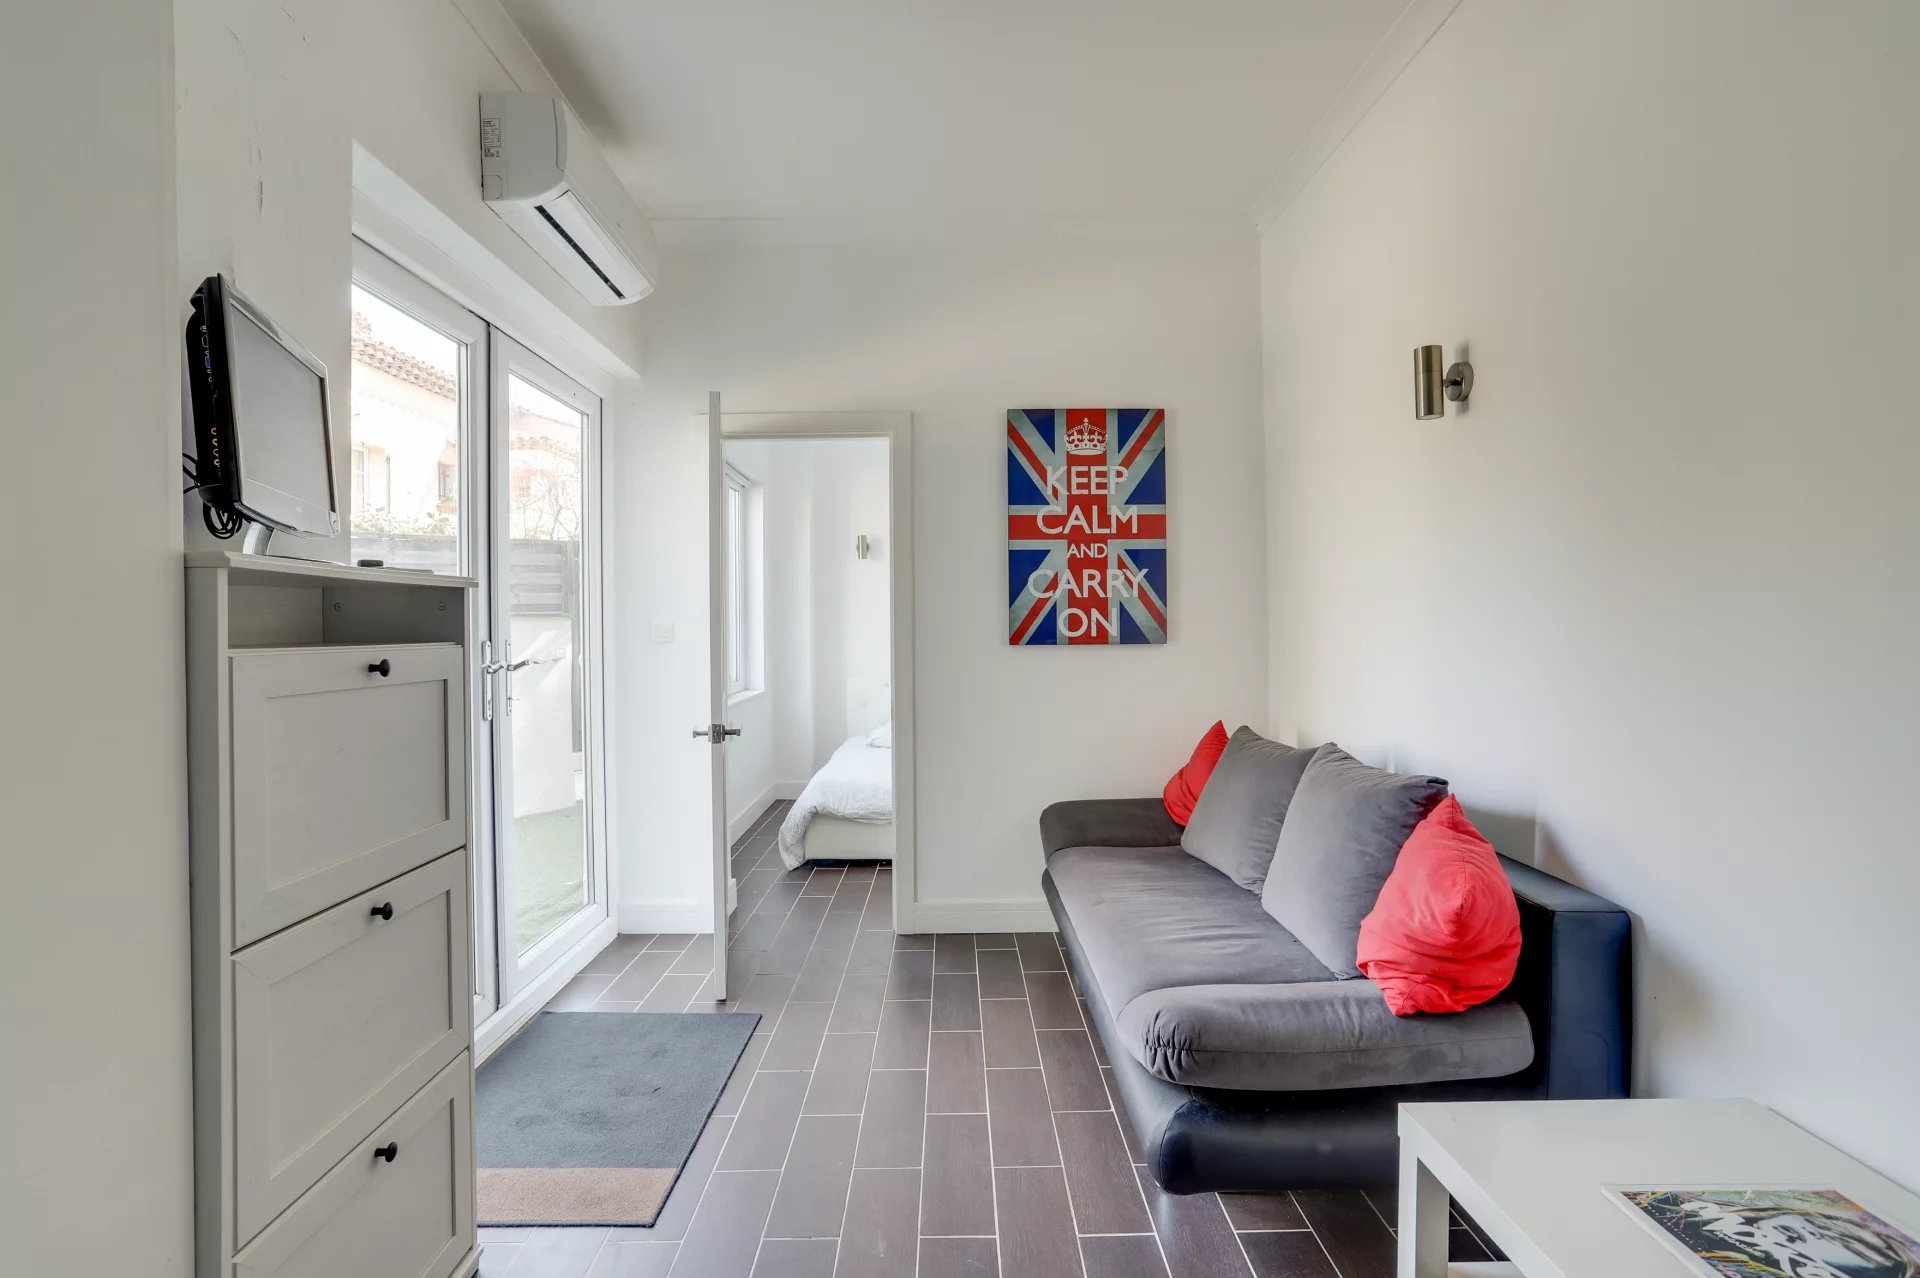 Ideally located for the centre, apartment with terrace and private parking space